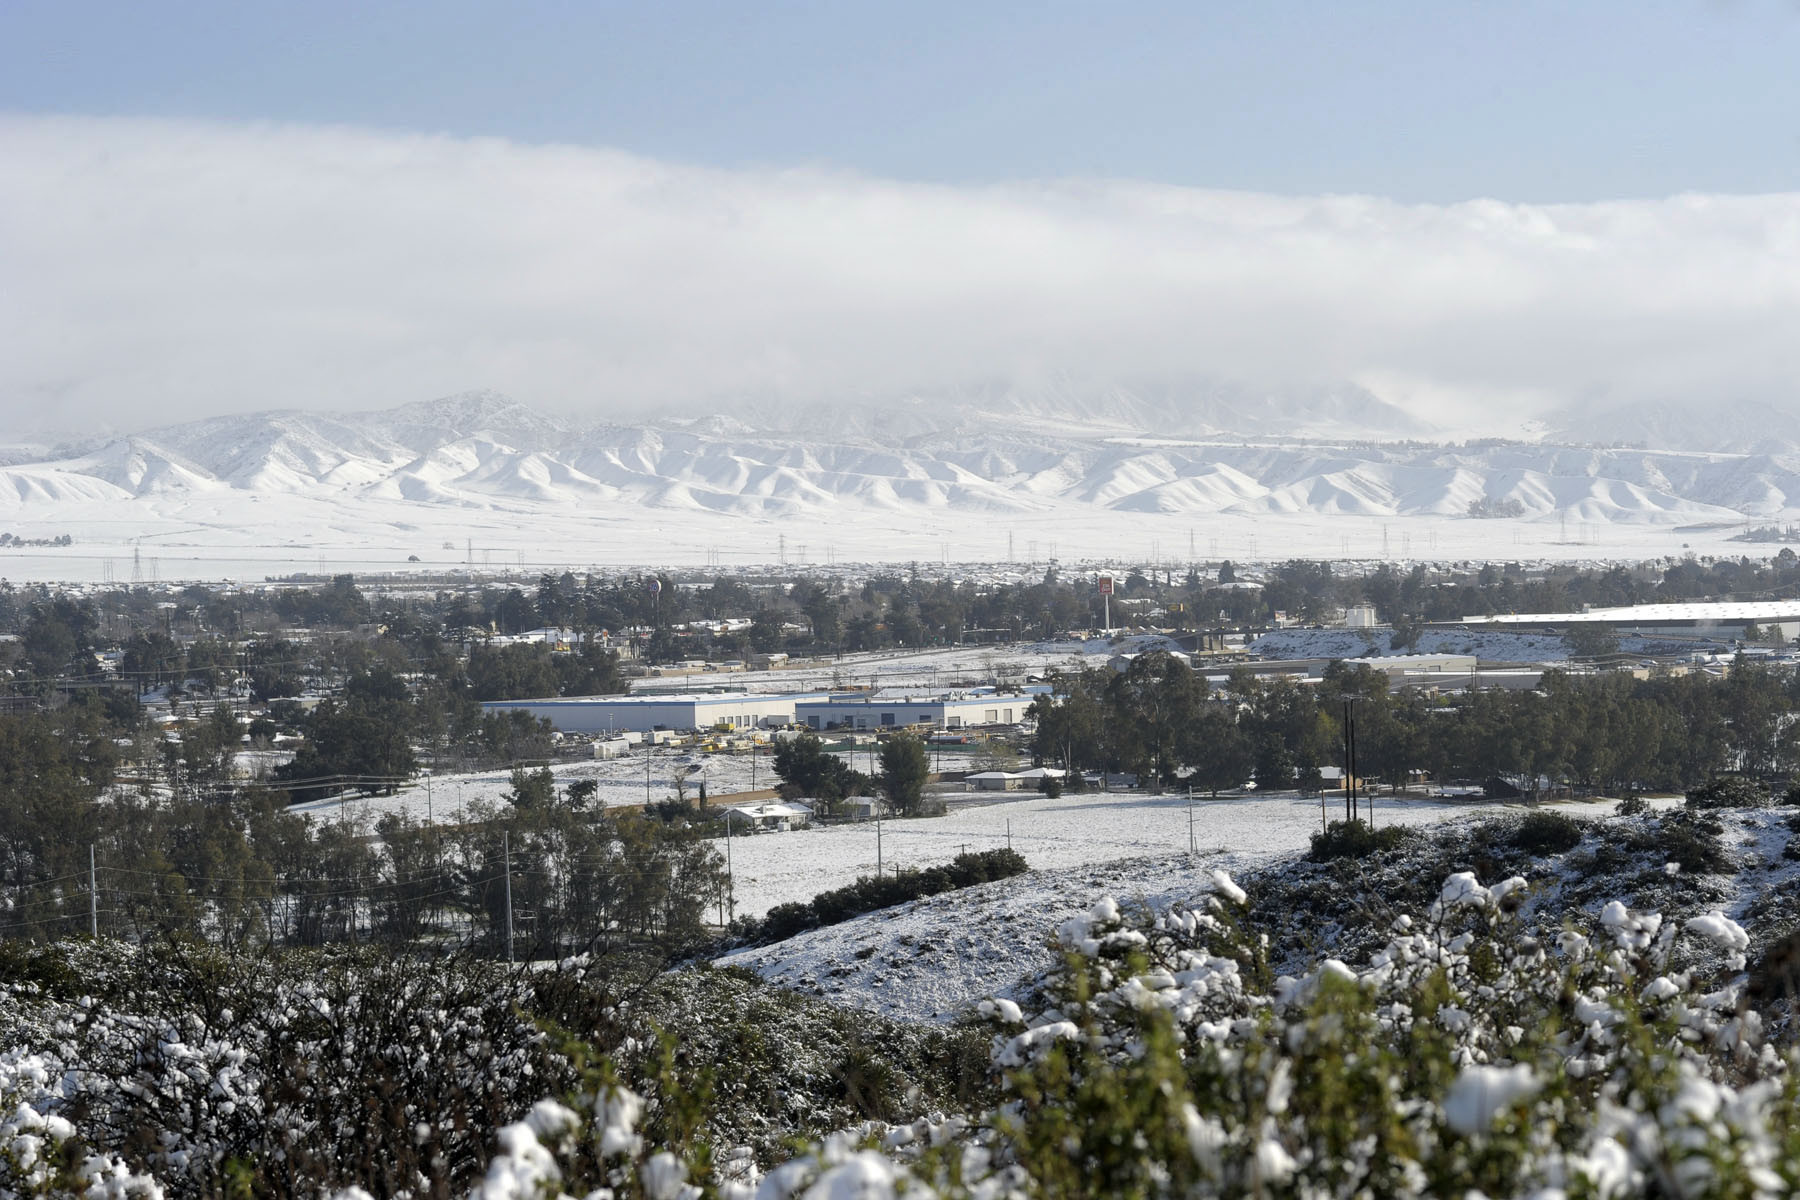 Beaumont with snowy mountains in the distance